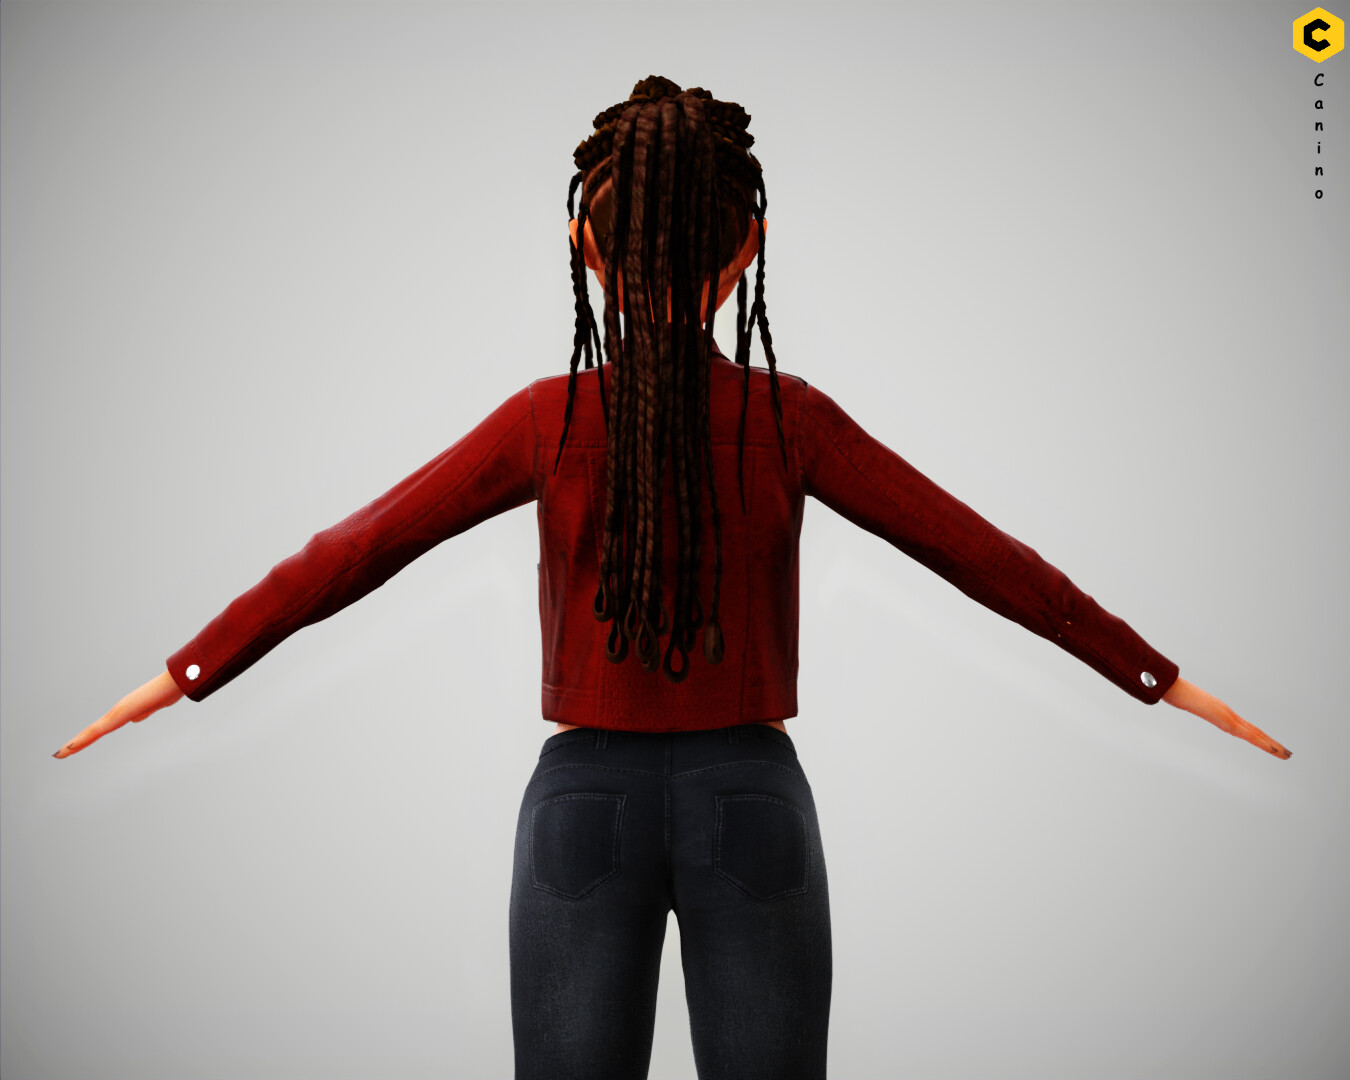 Artstation Cartoon Girl Woman Rigged Character 3d Model Resources